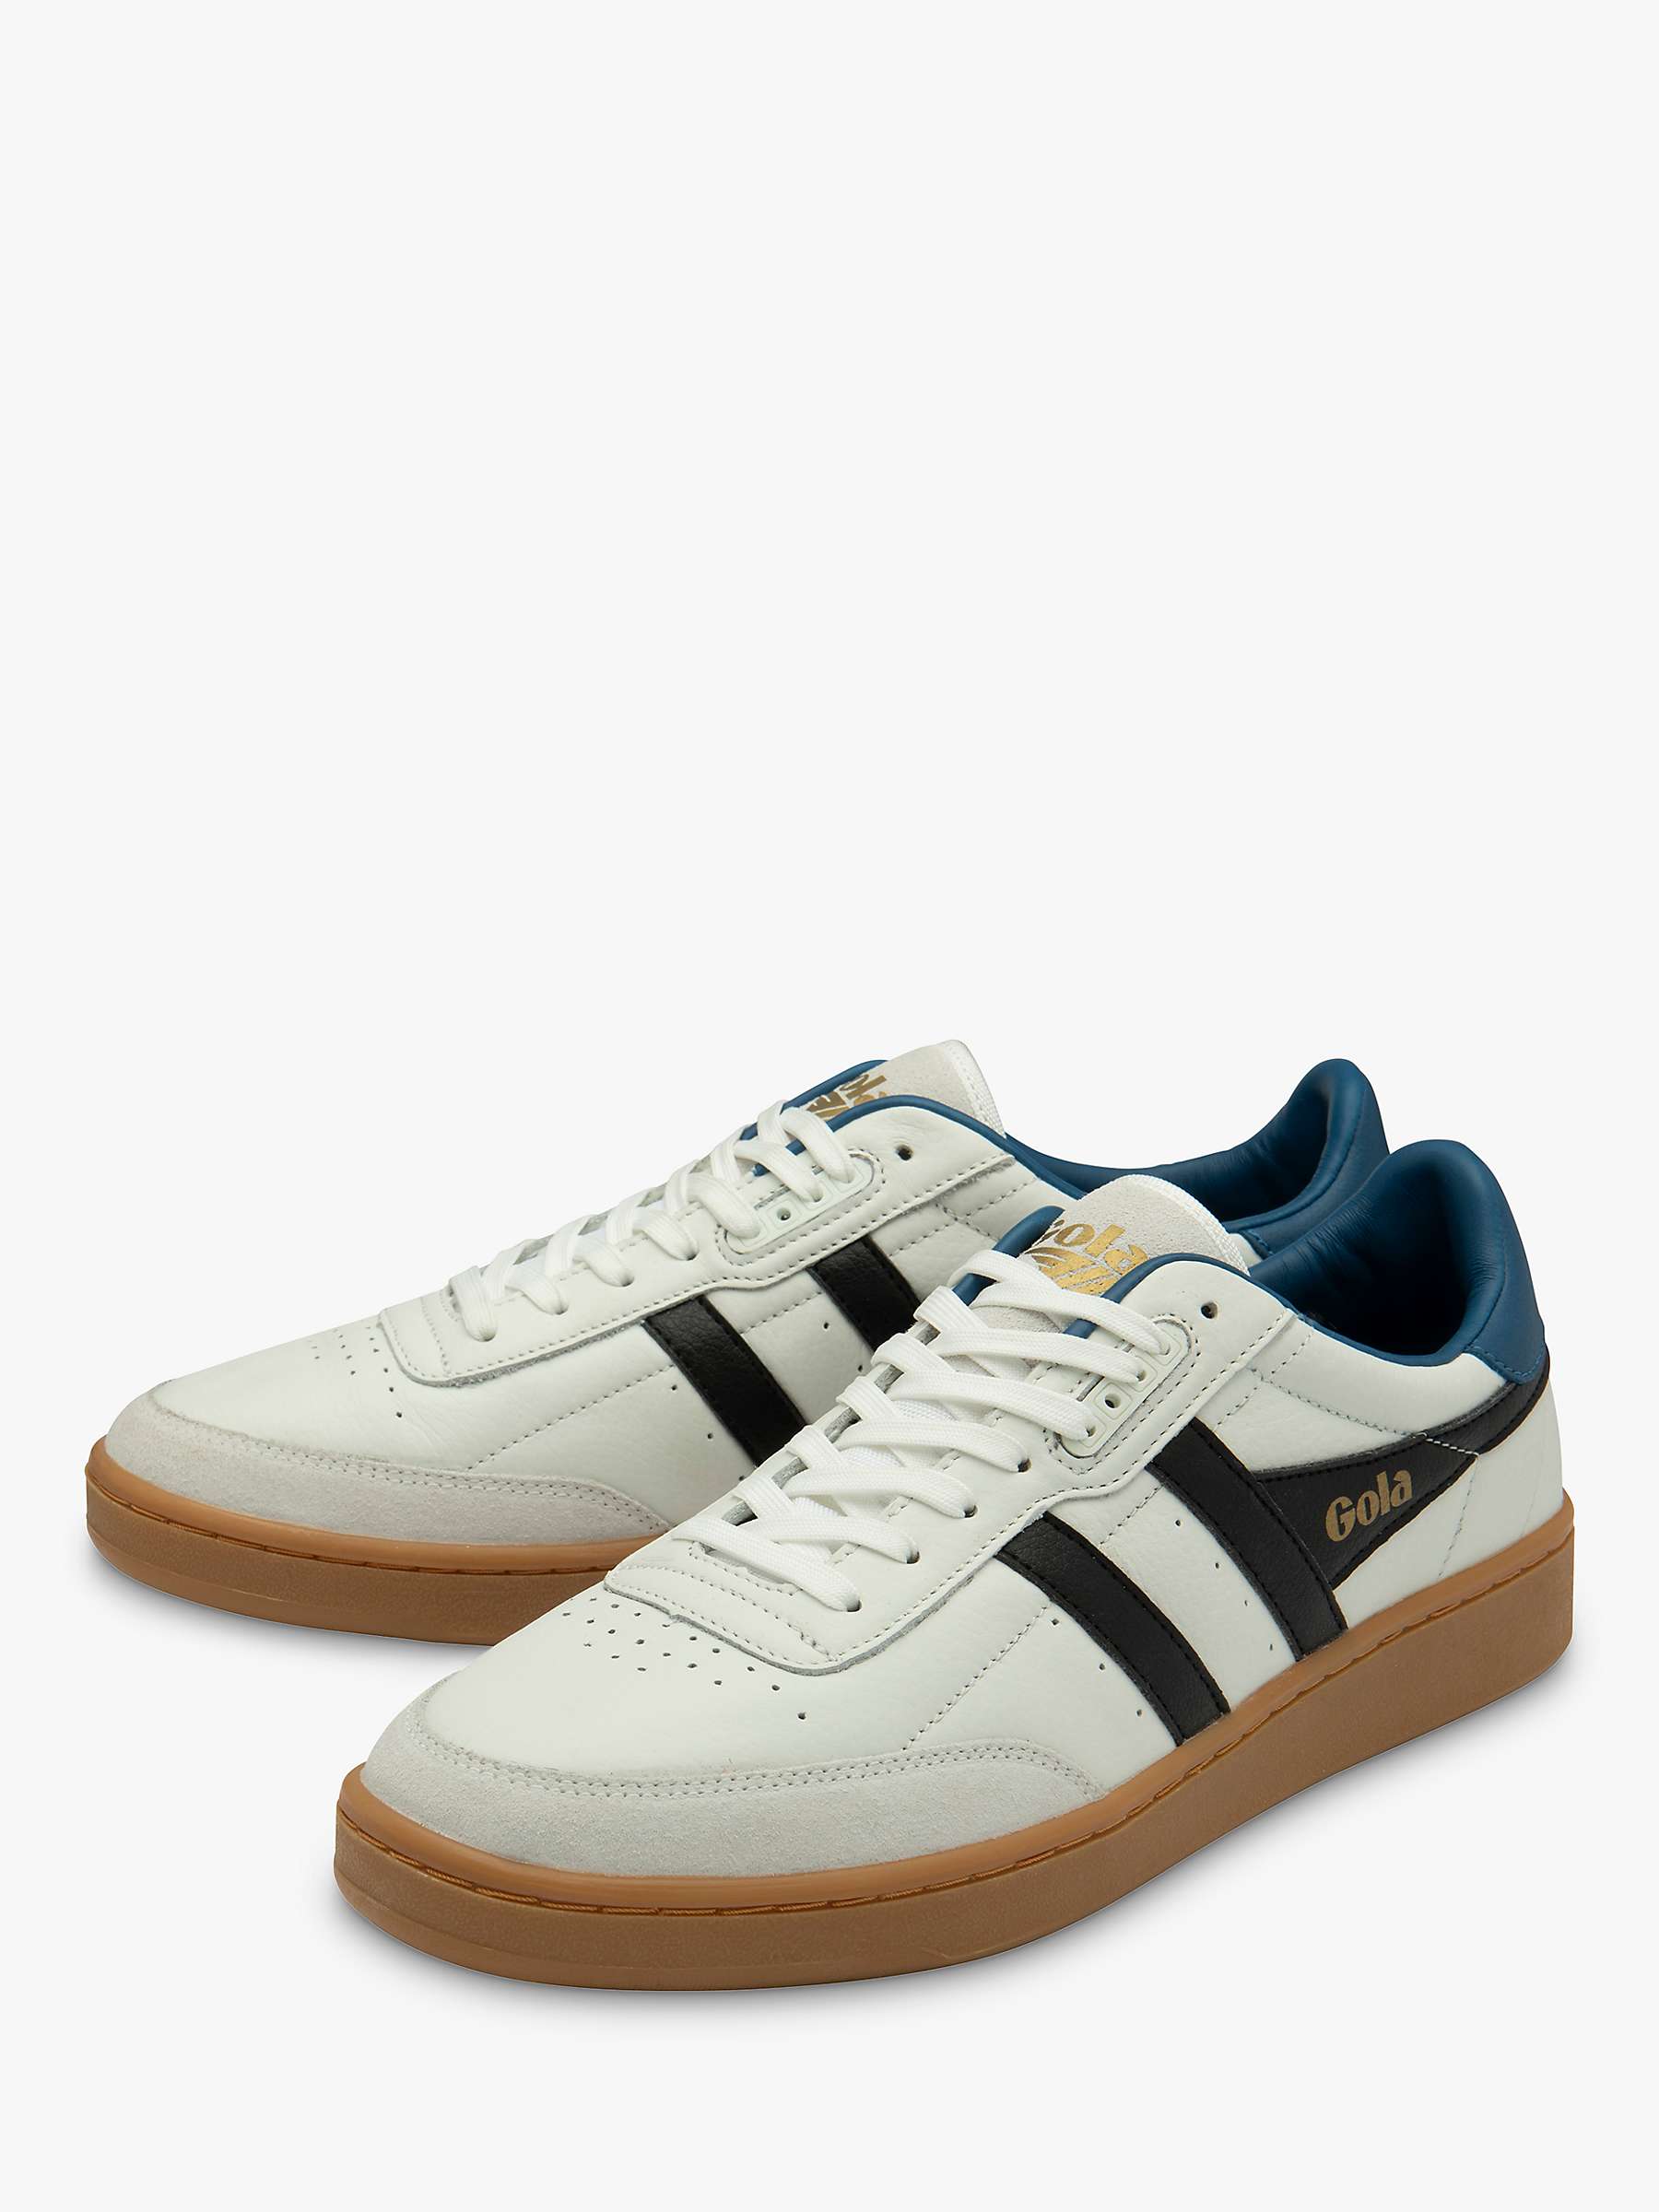 Buy Gola Classics Contact Leather Lace Up Trainers, White/Black/Blue/Gum Online at johnlewis.com